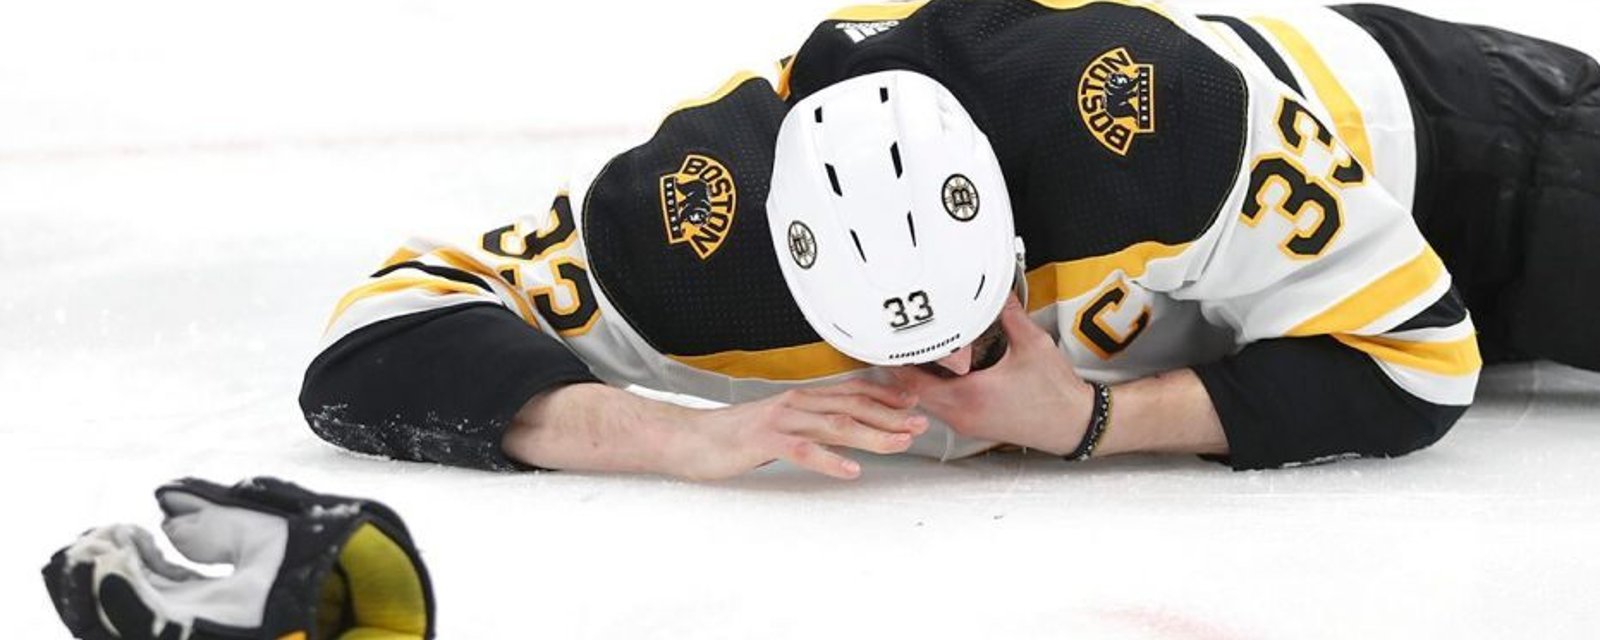 Breaking: The worst is confirmed for Chara and the Bruins 